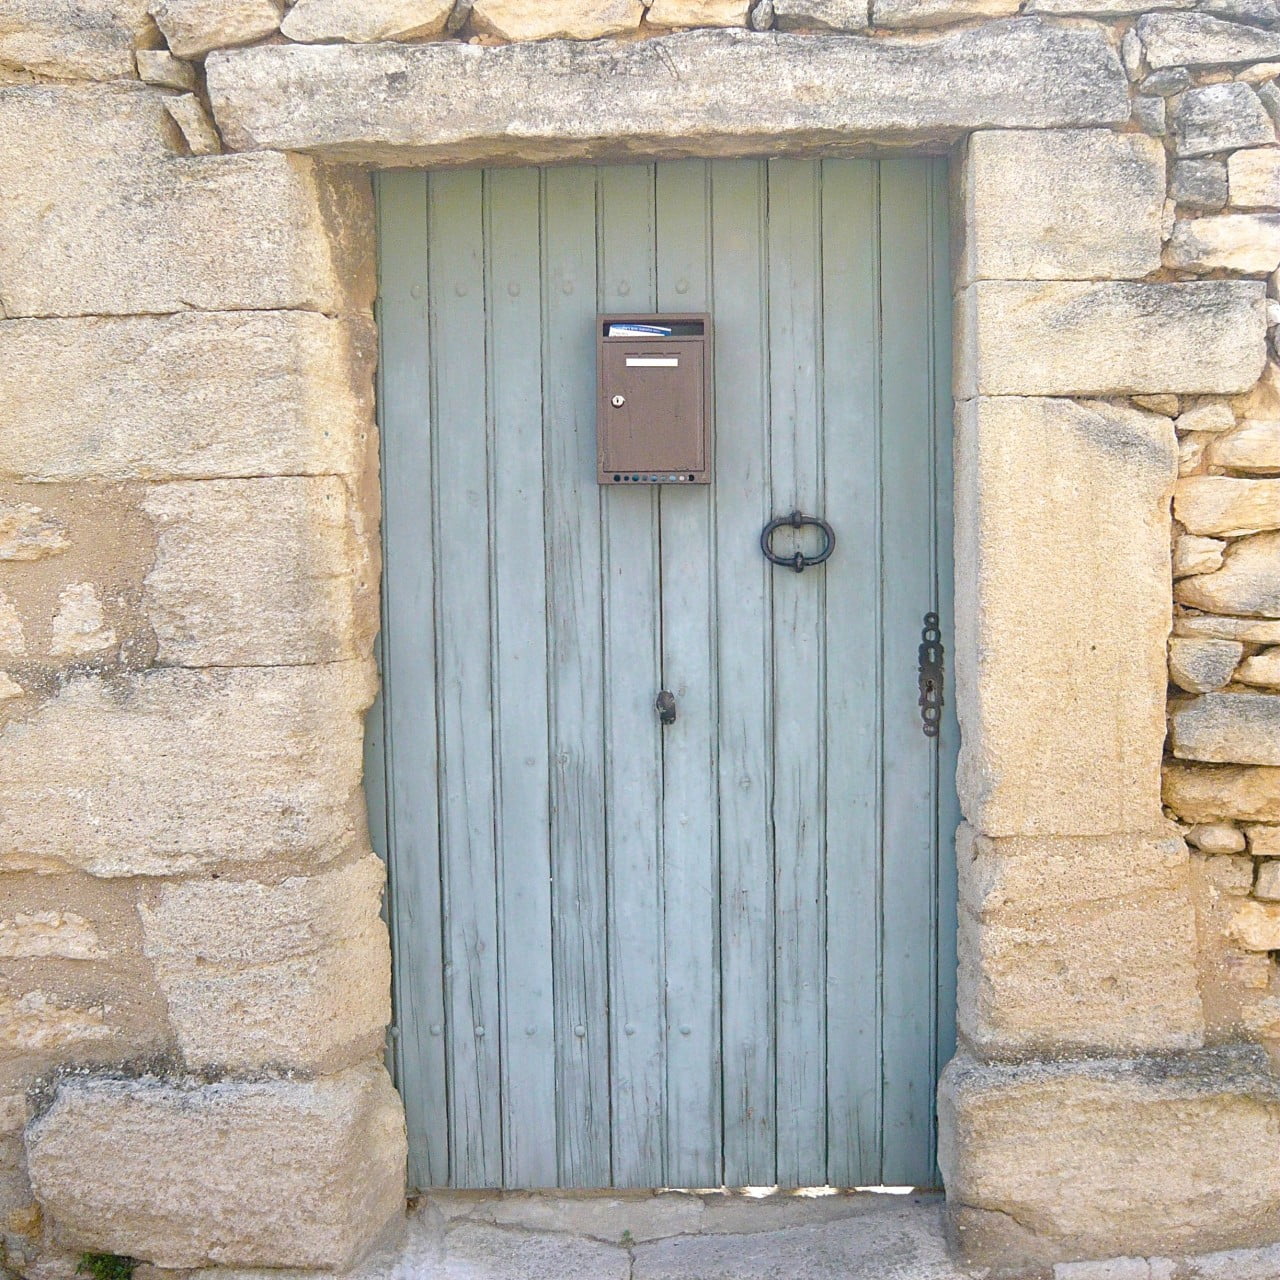 This blue door looks wonderful against the raging stone. I took this photo in Provence & just loved these simple understated entrances